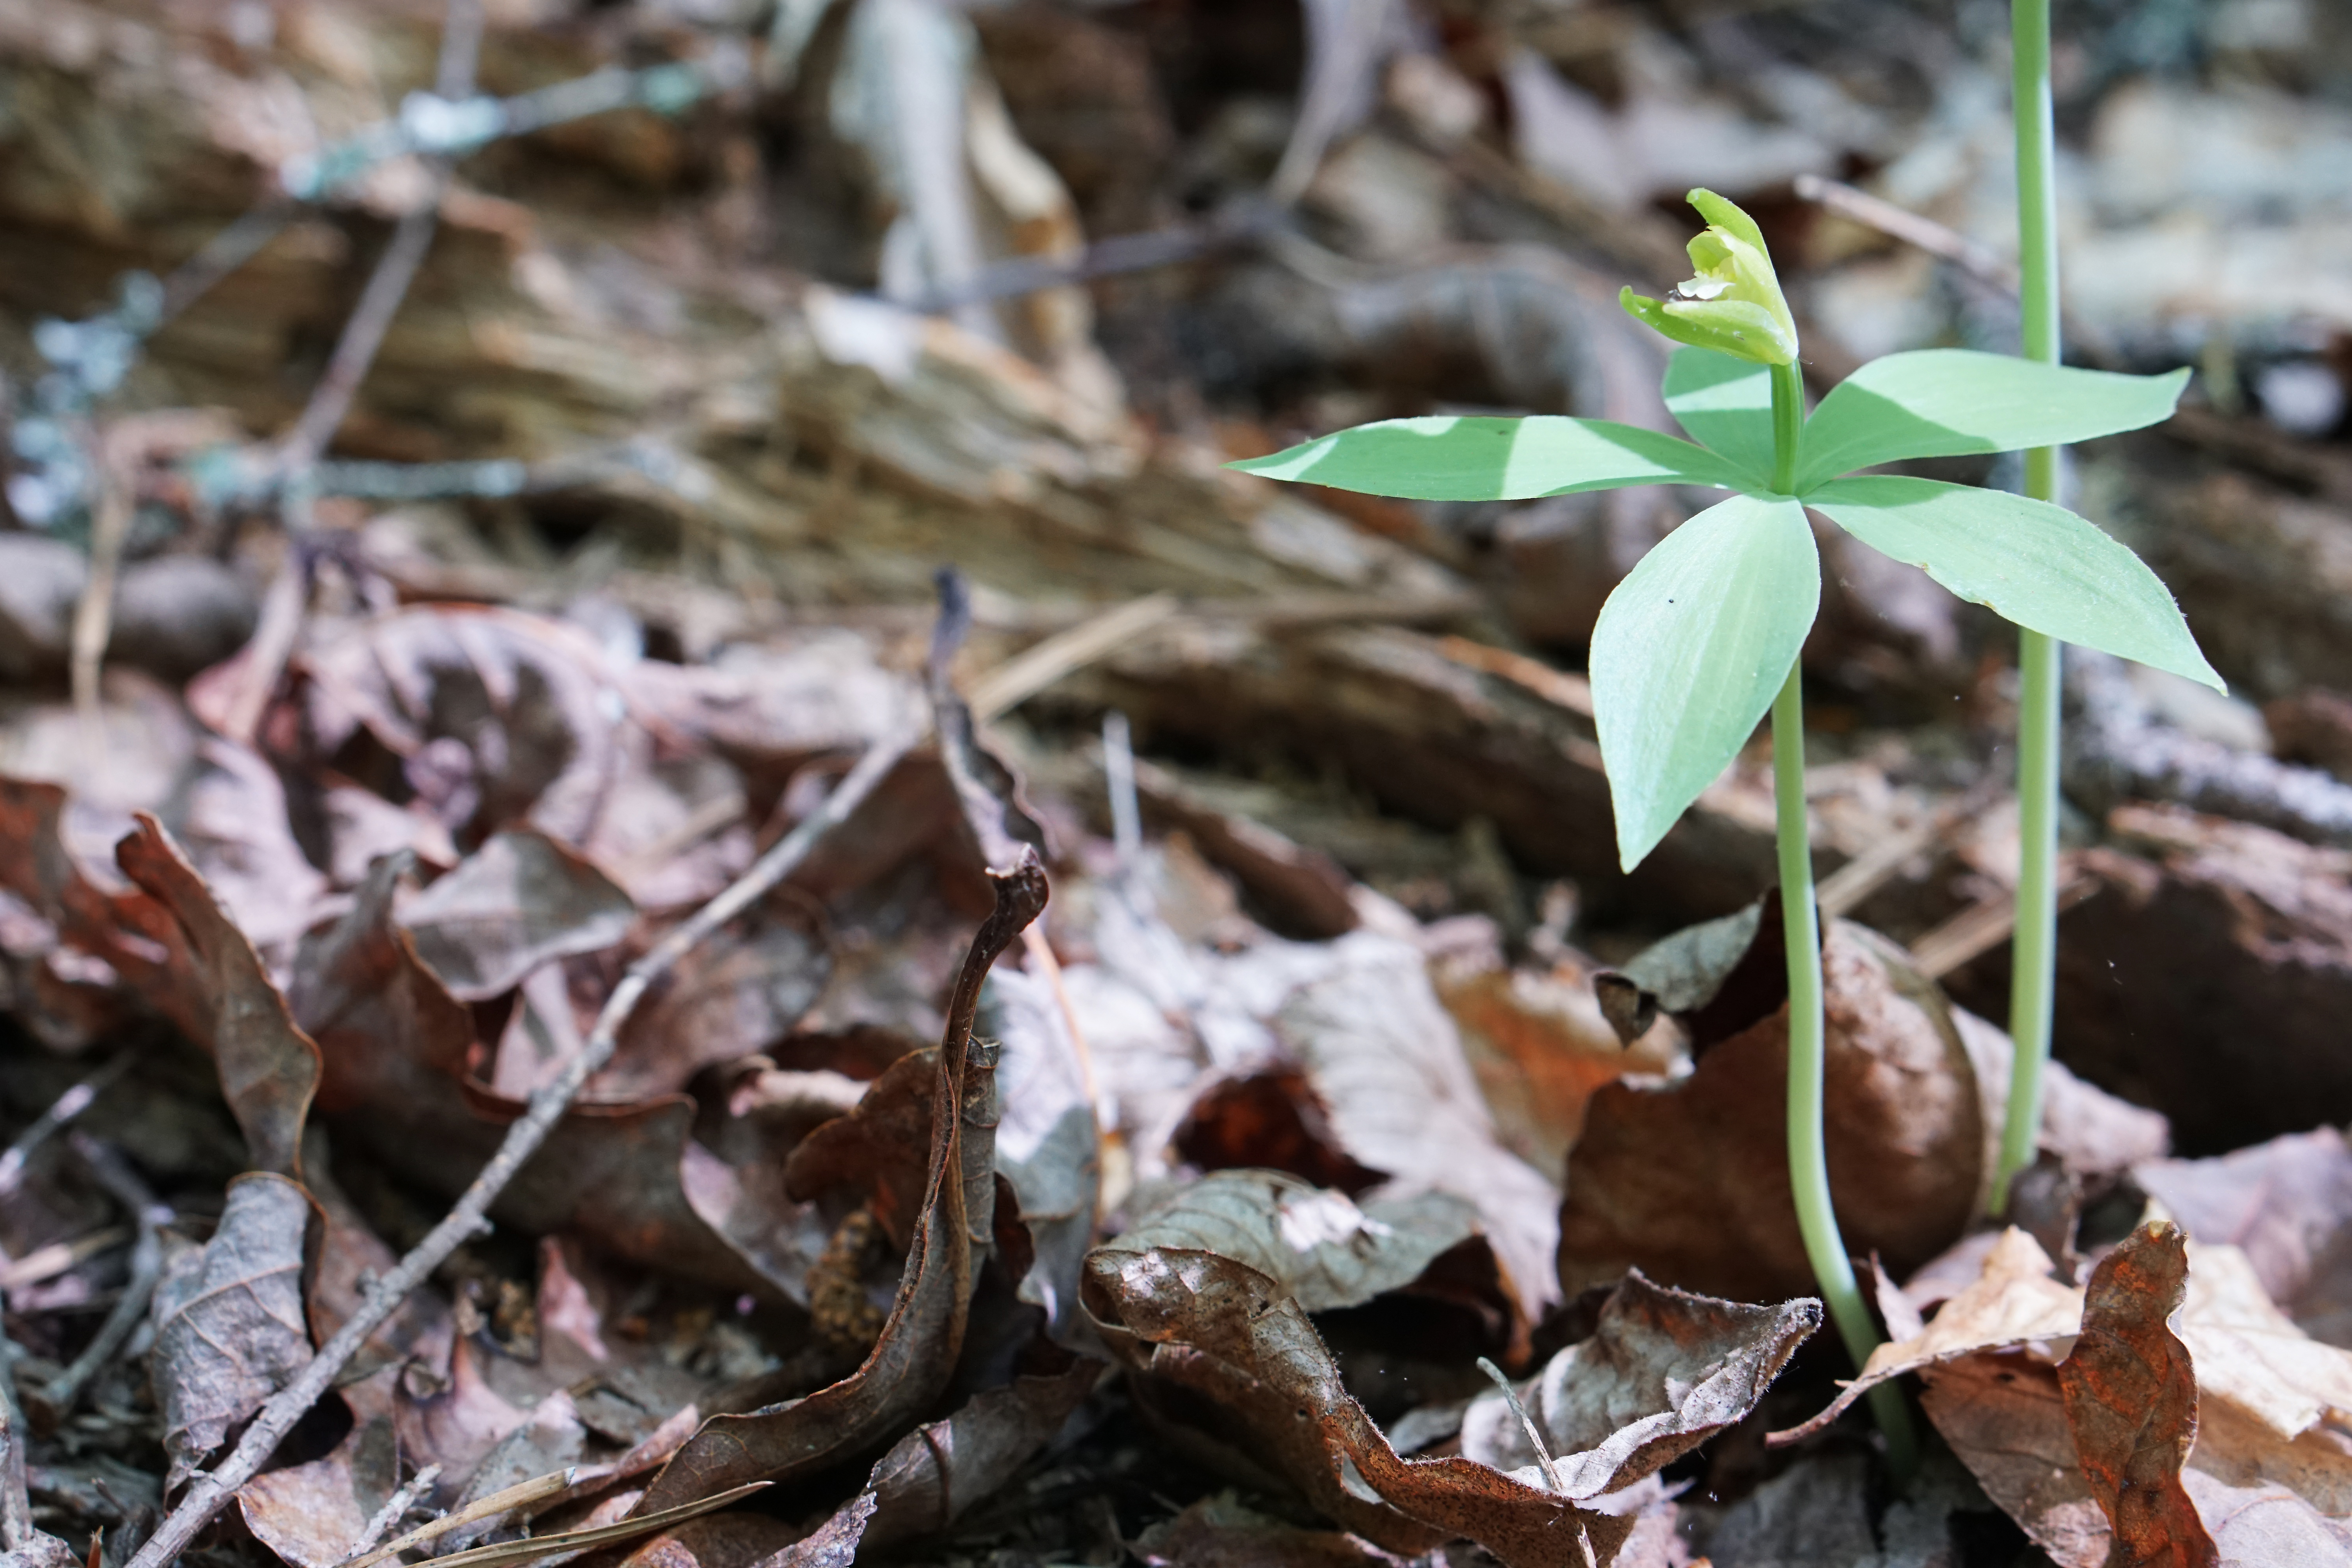 A bright orange stem, with five leaves and a flower emerging from the leaf-covered forest floor